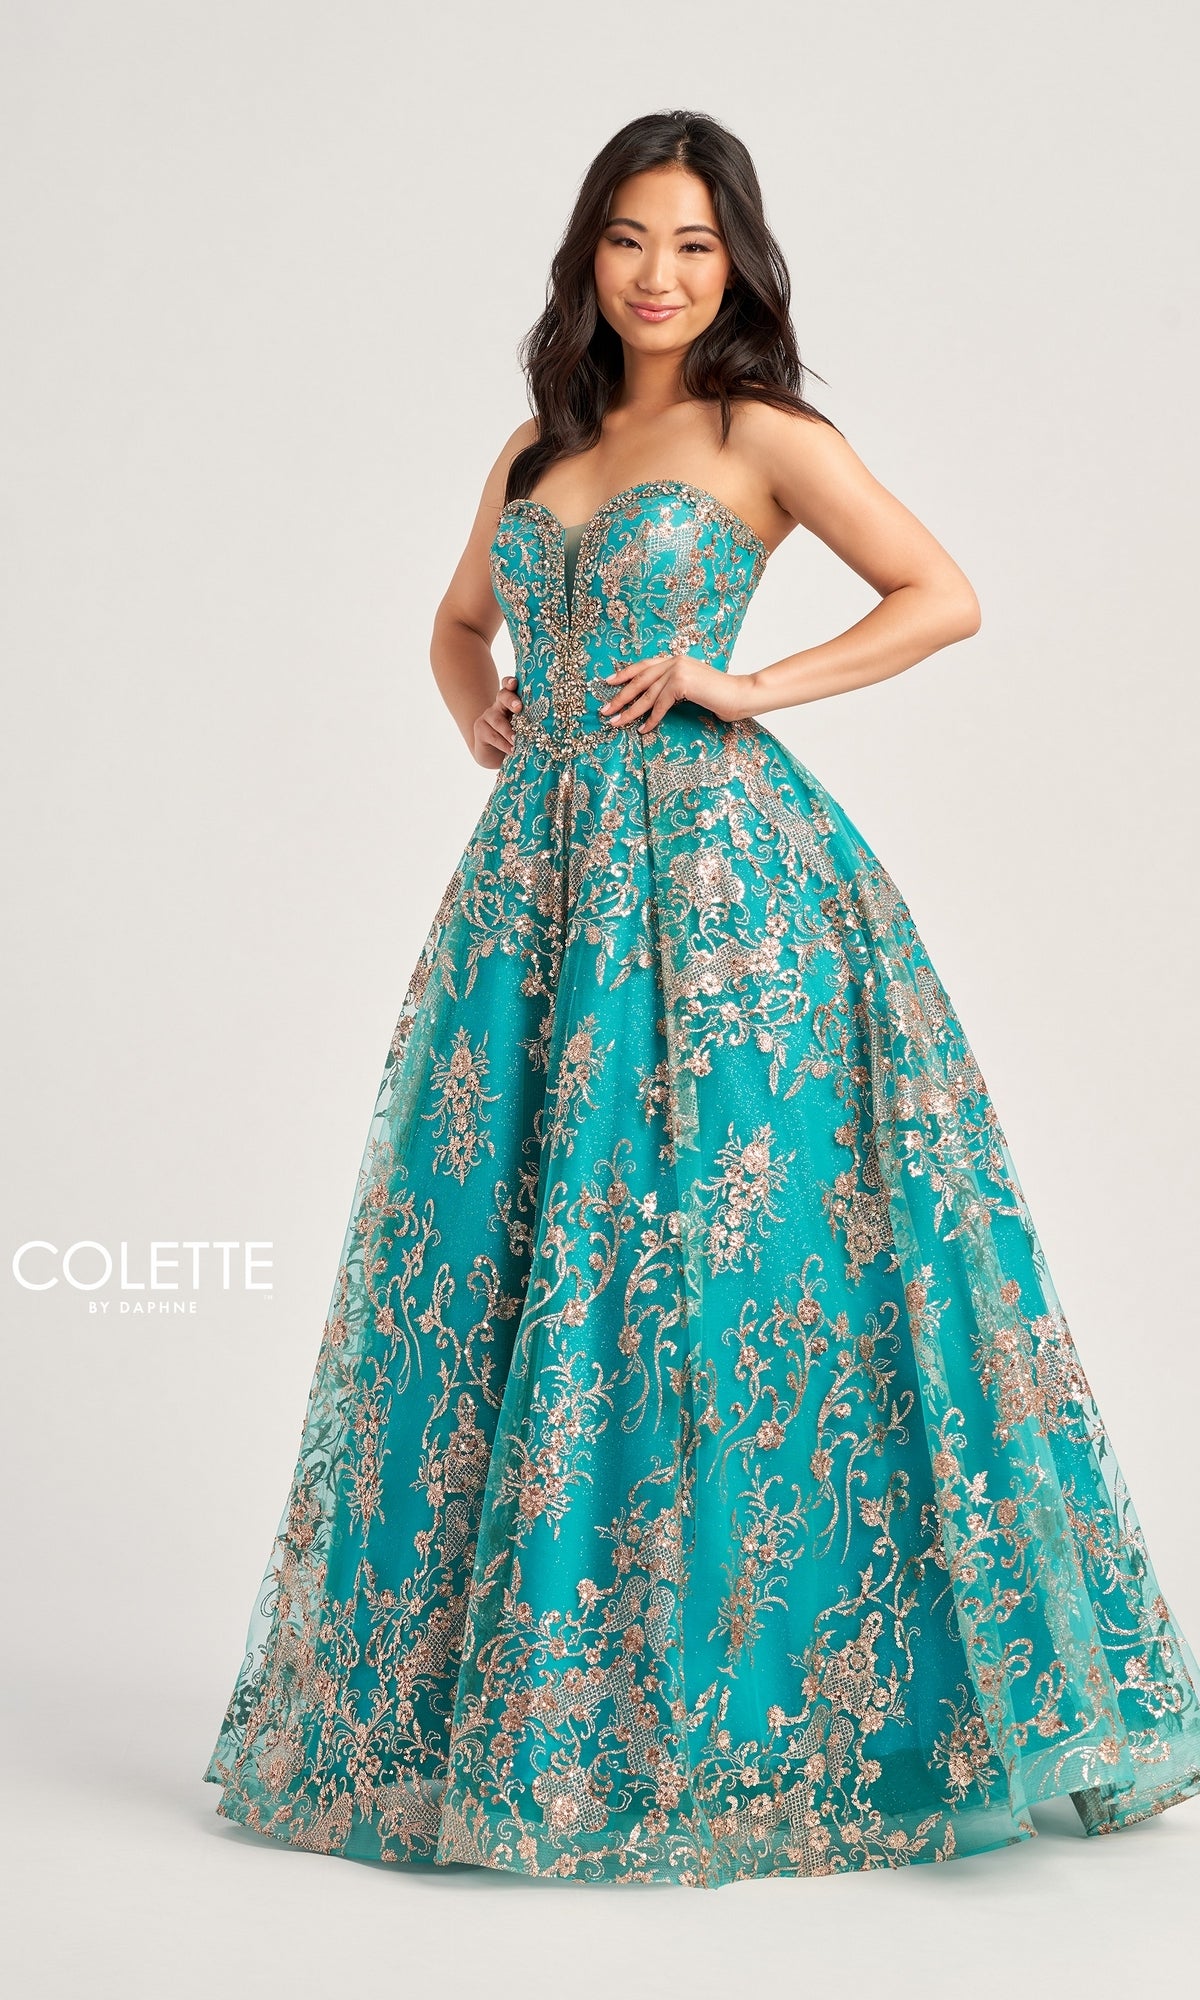 Colette Strapless Long Prom Ball Gown CL5101